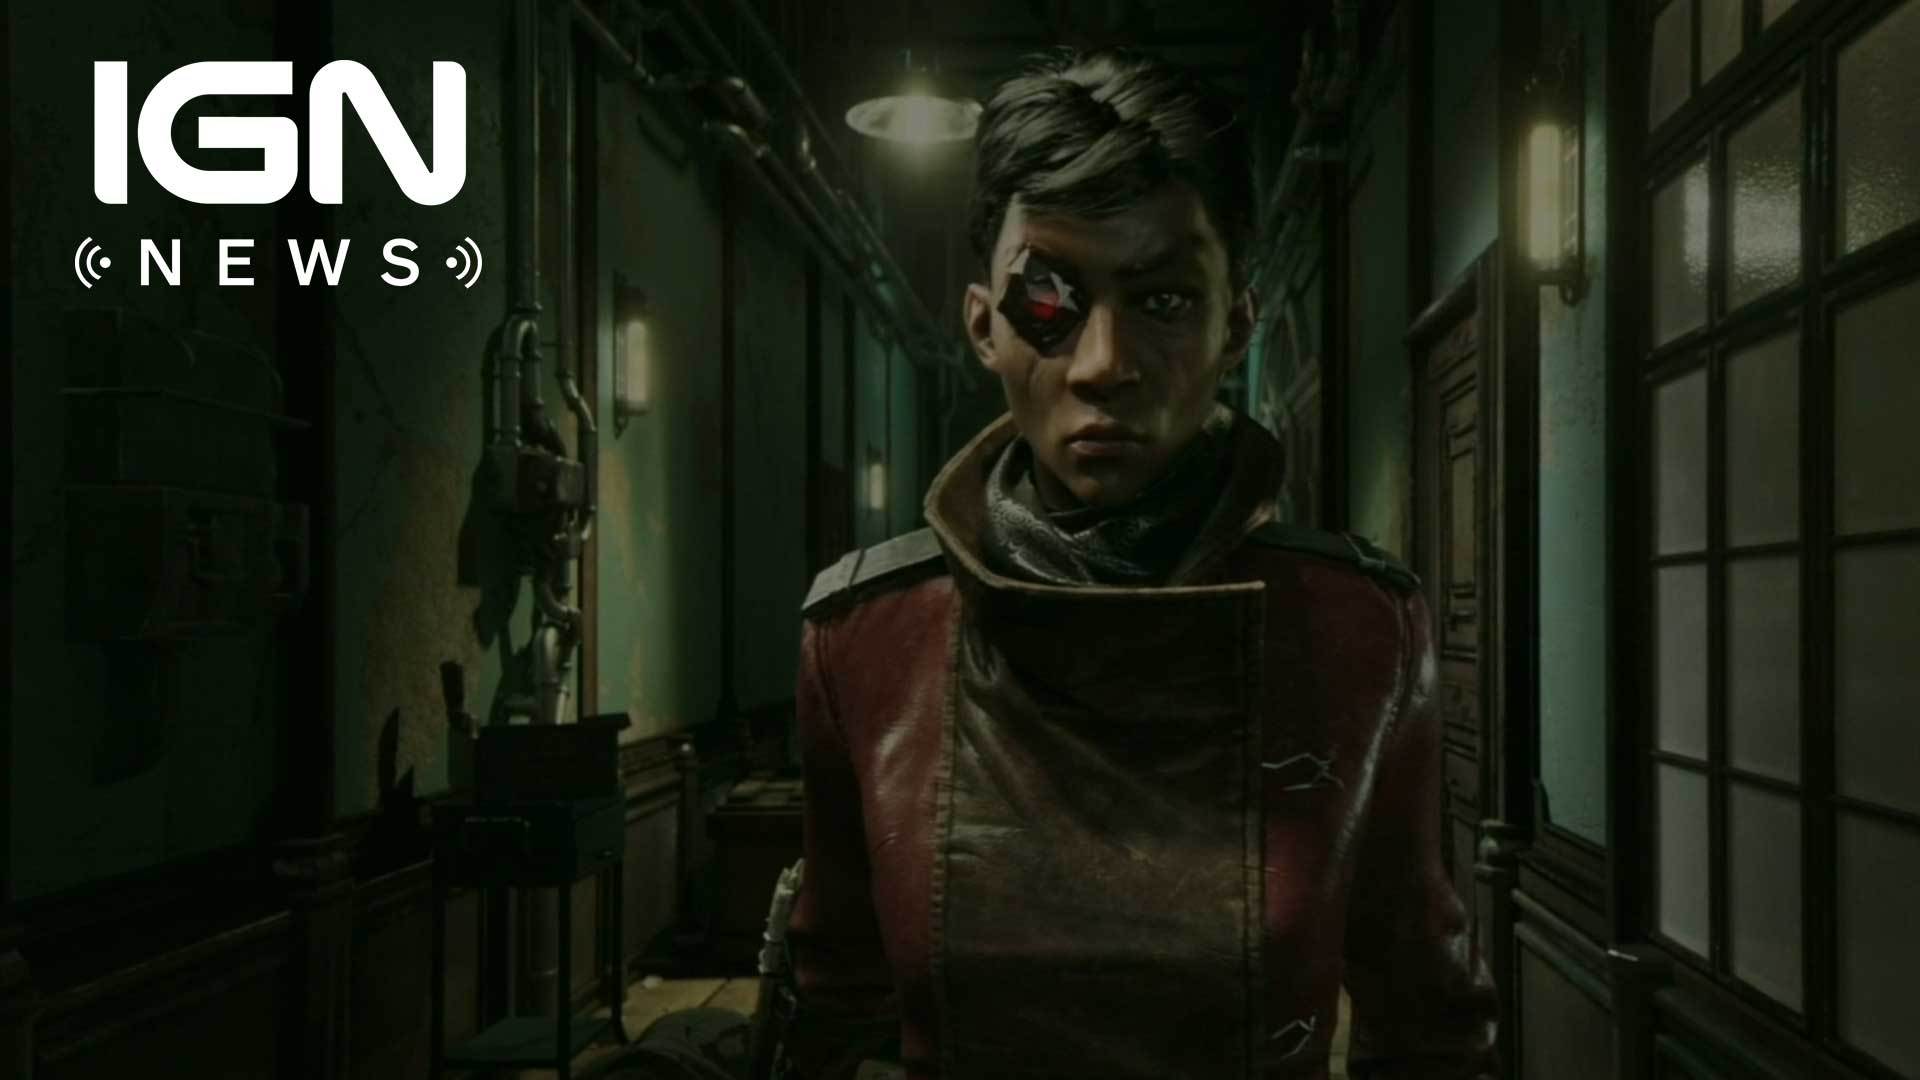 E3 2017: Dishonored 2 Death of the Outsider DLC Revealed